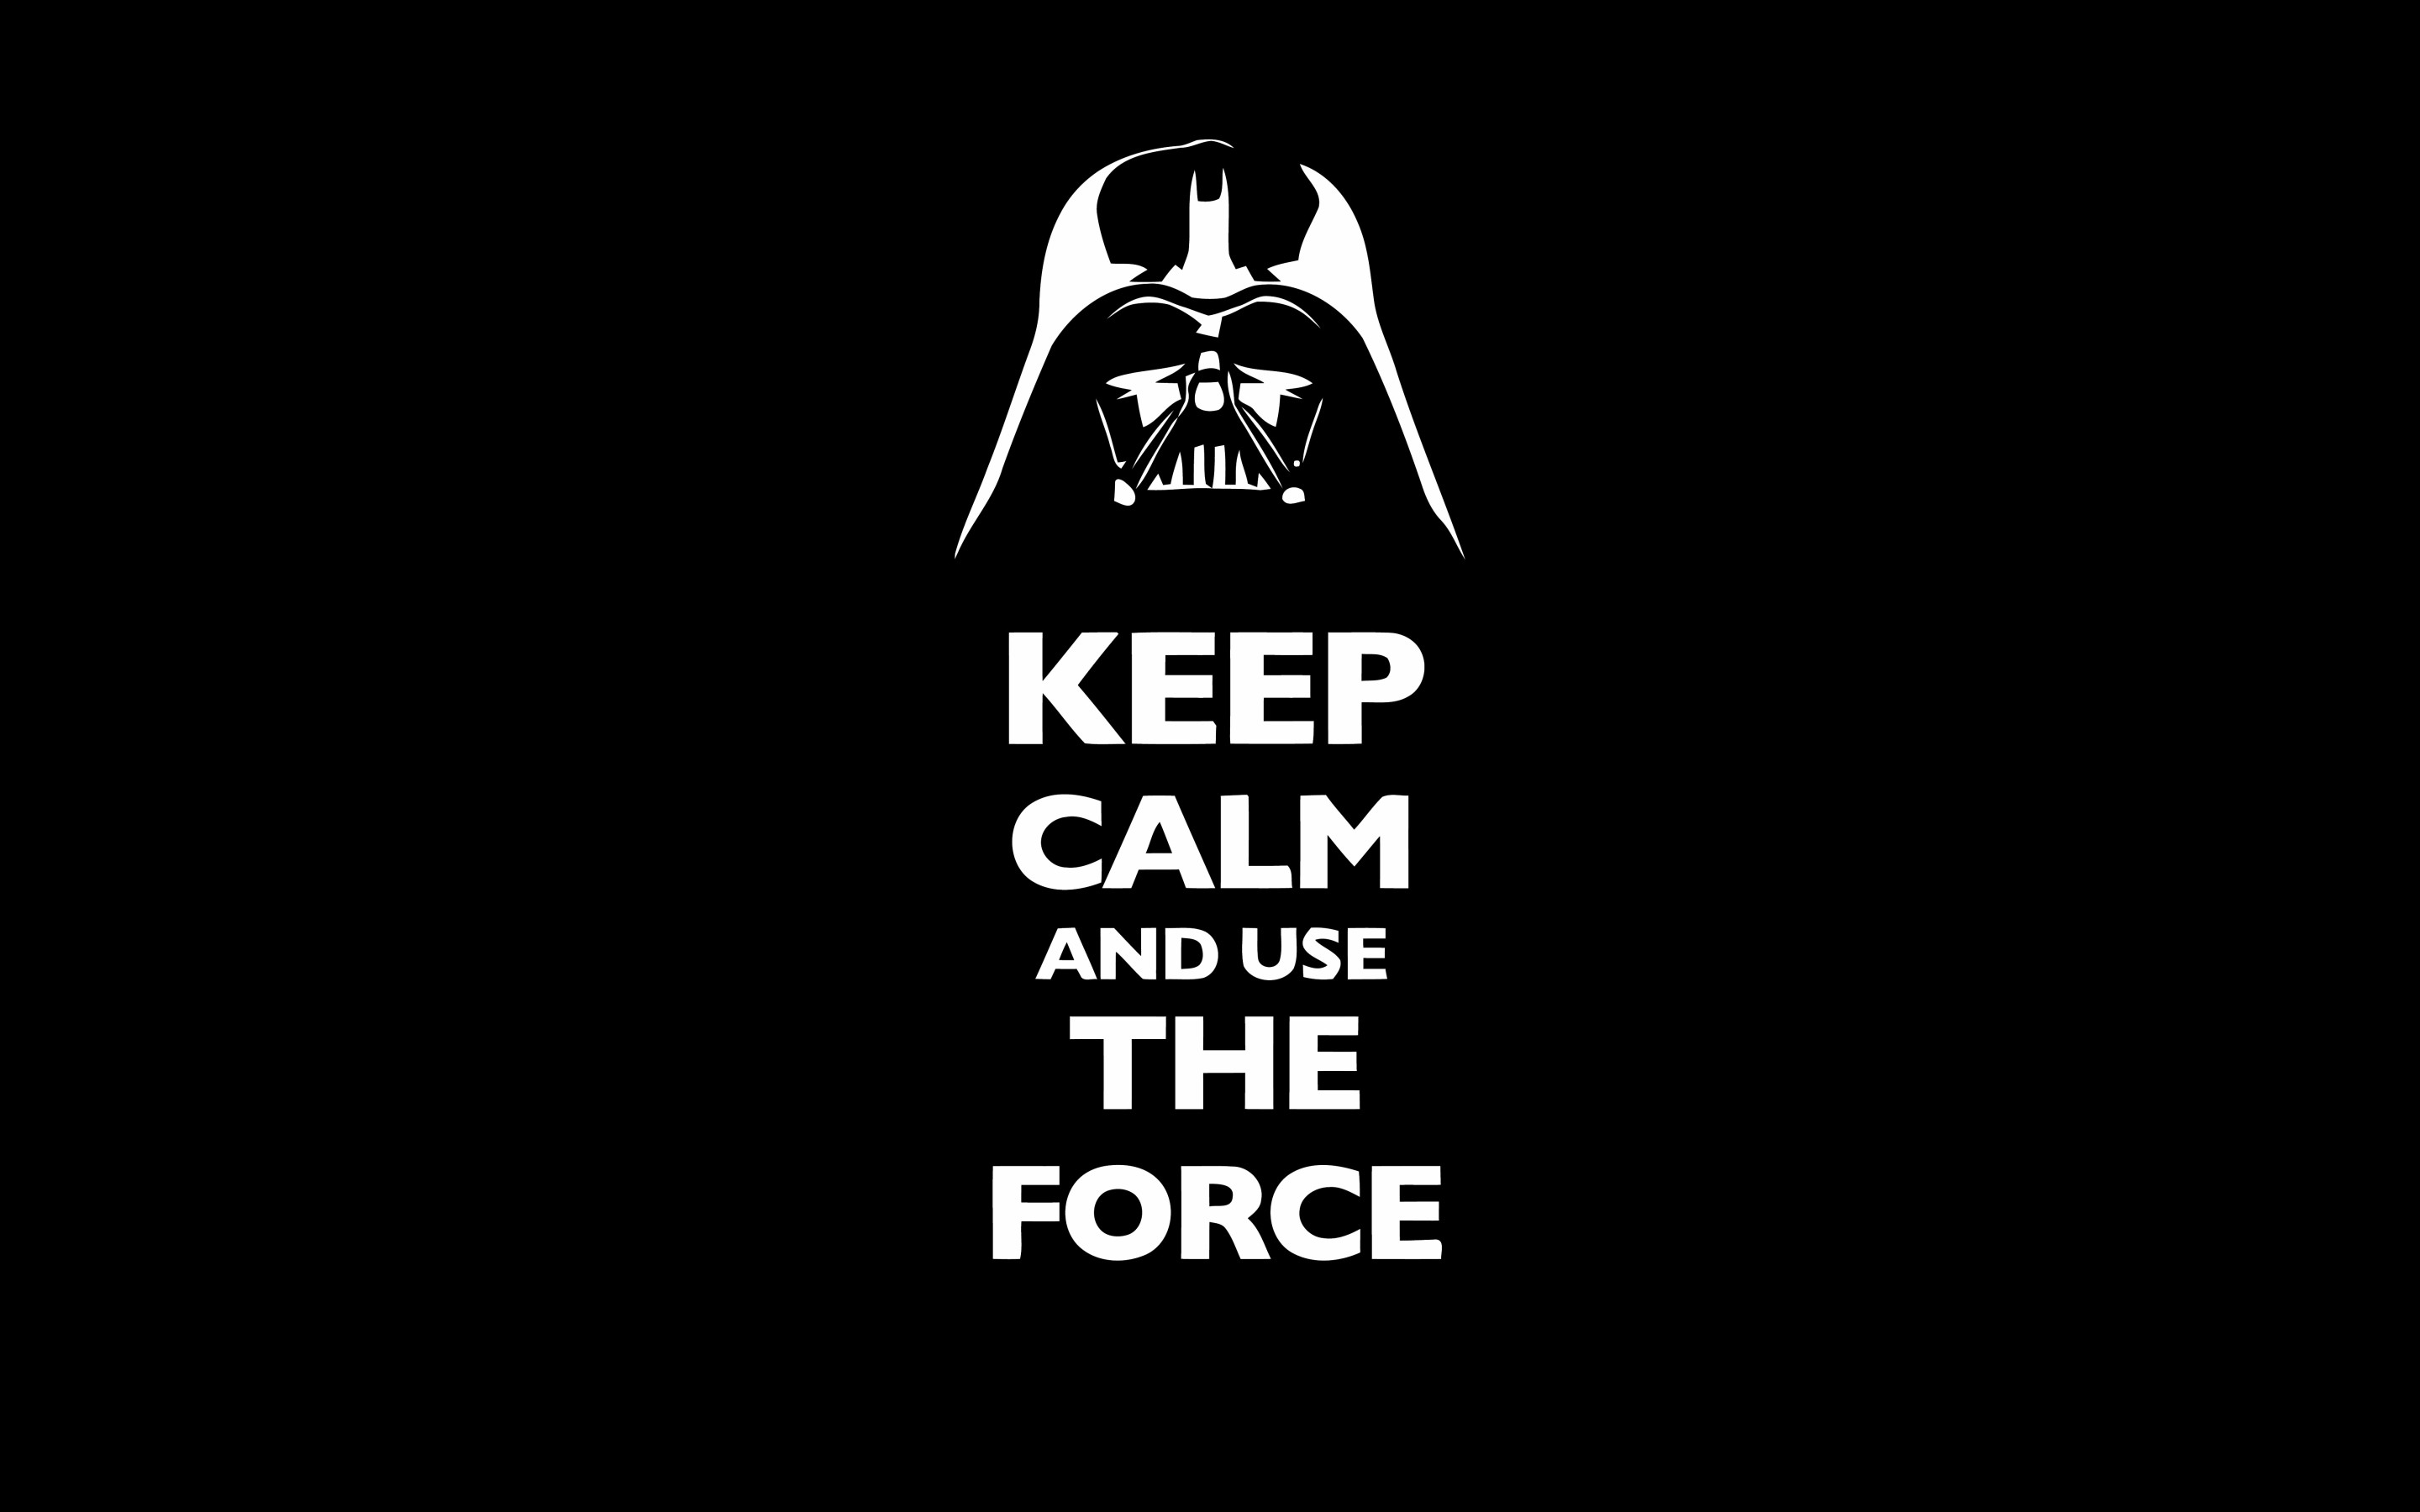 Keep Calm and use the force